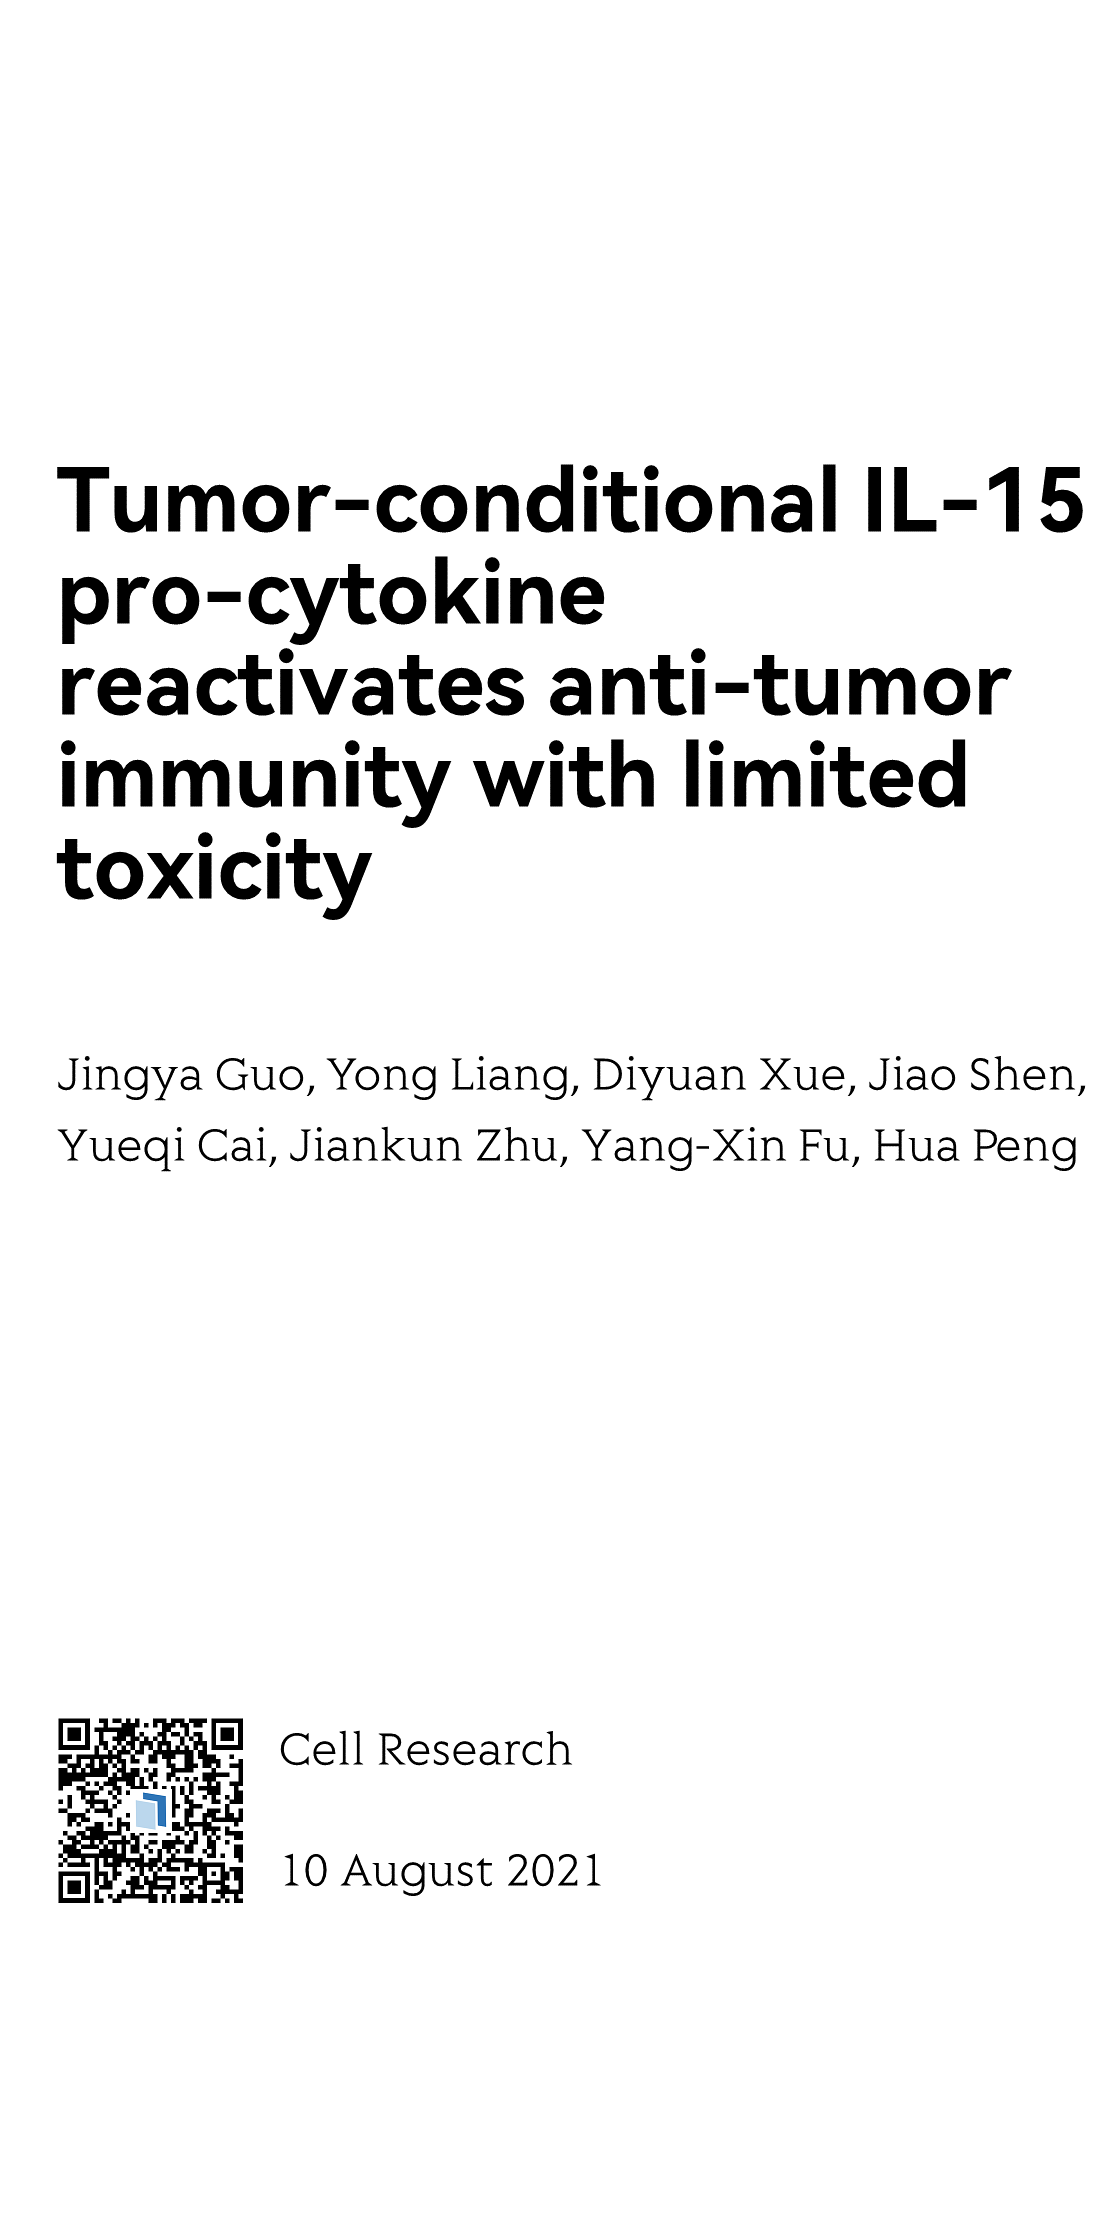 Tumor-conditional IL-15 pro-cytokine reactivates anti-tumor immunity with limited toxicity_1